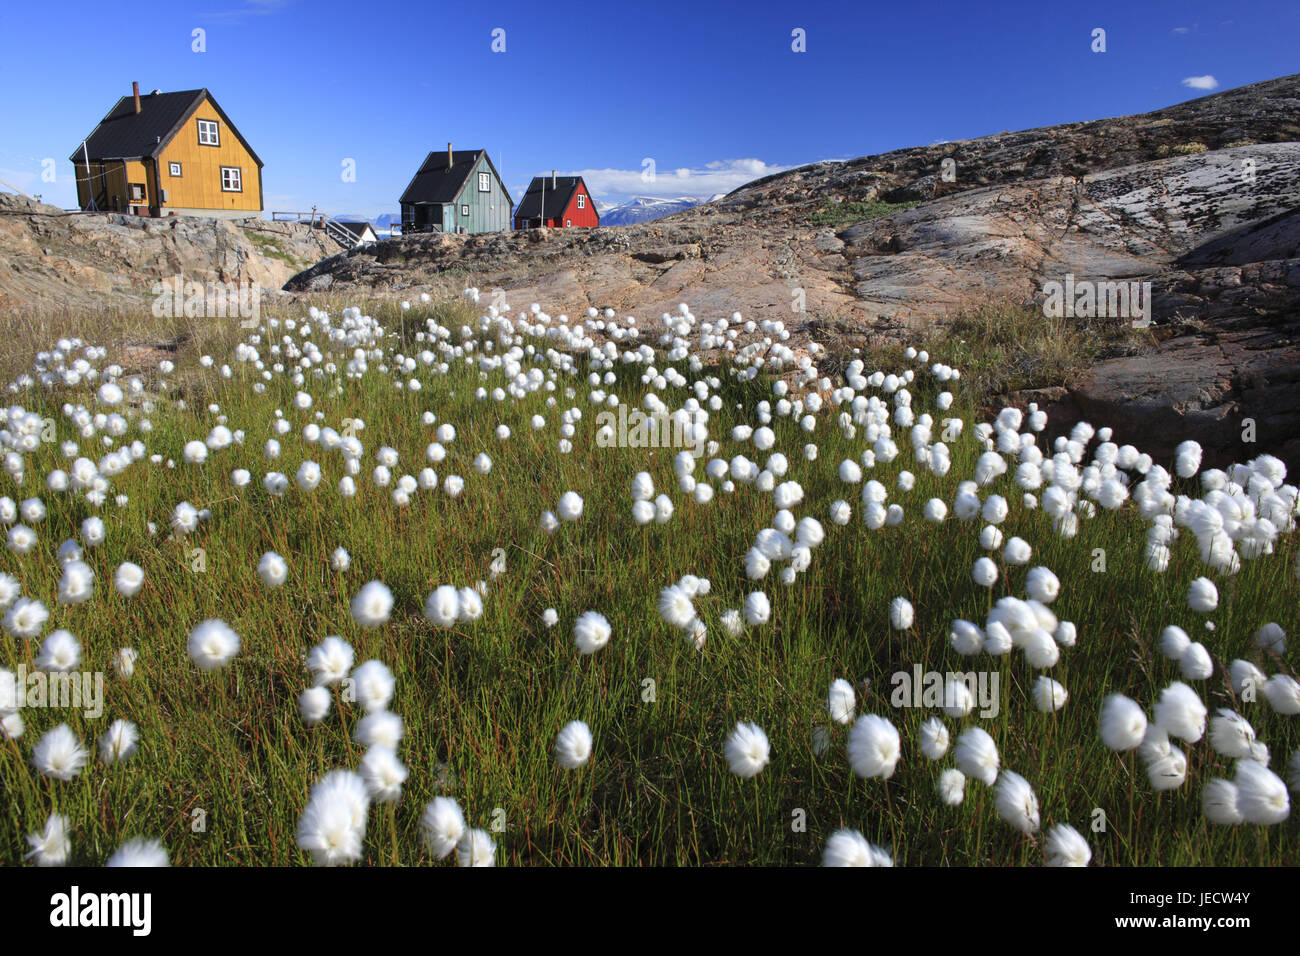 Greenland, Uummannaq, houses, rocks, meadow, cotton grass, Eriophorum spec., Northern Greenland, the Arctic, summer, vegetation, botany, grass, plants, reeds grass, flower sleeves, nature, shore, coast, scenery, outside, deserted, timber houses, residential houses, architecture, Stock Photo